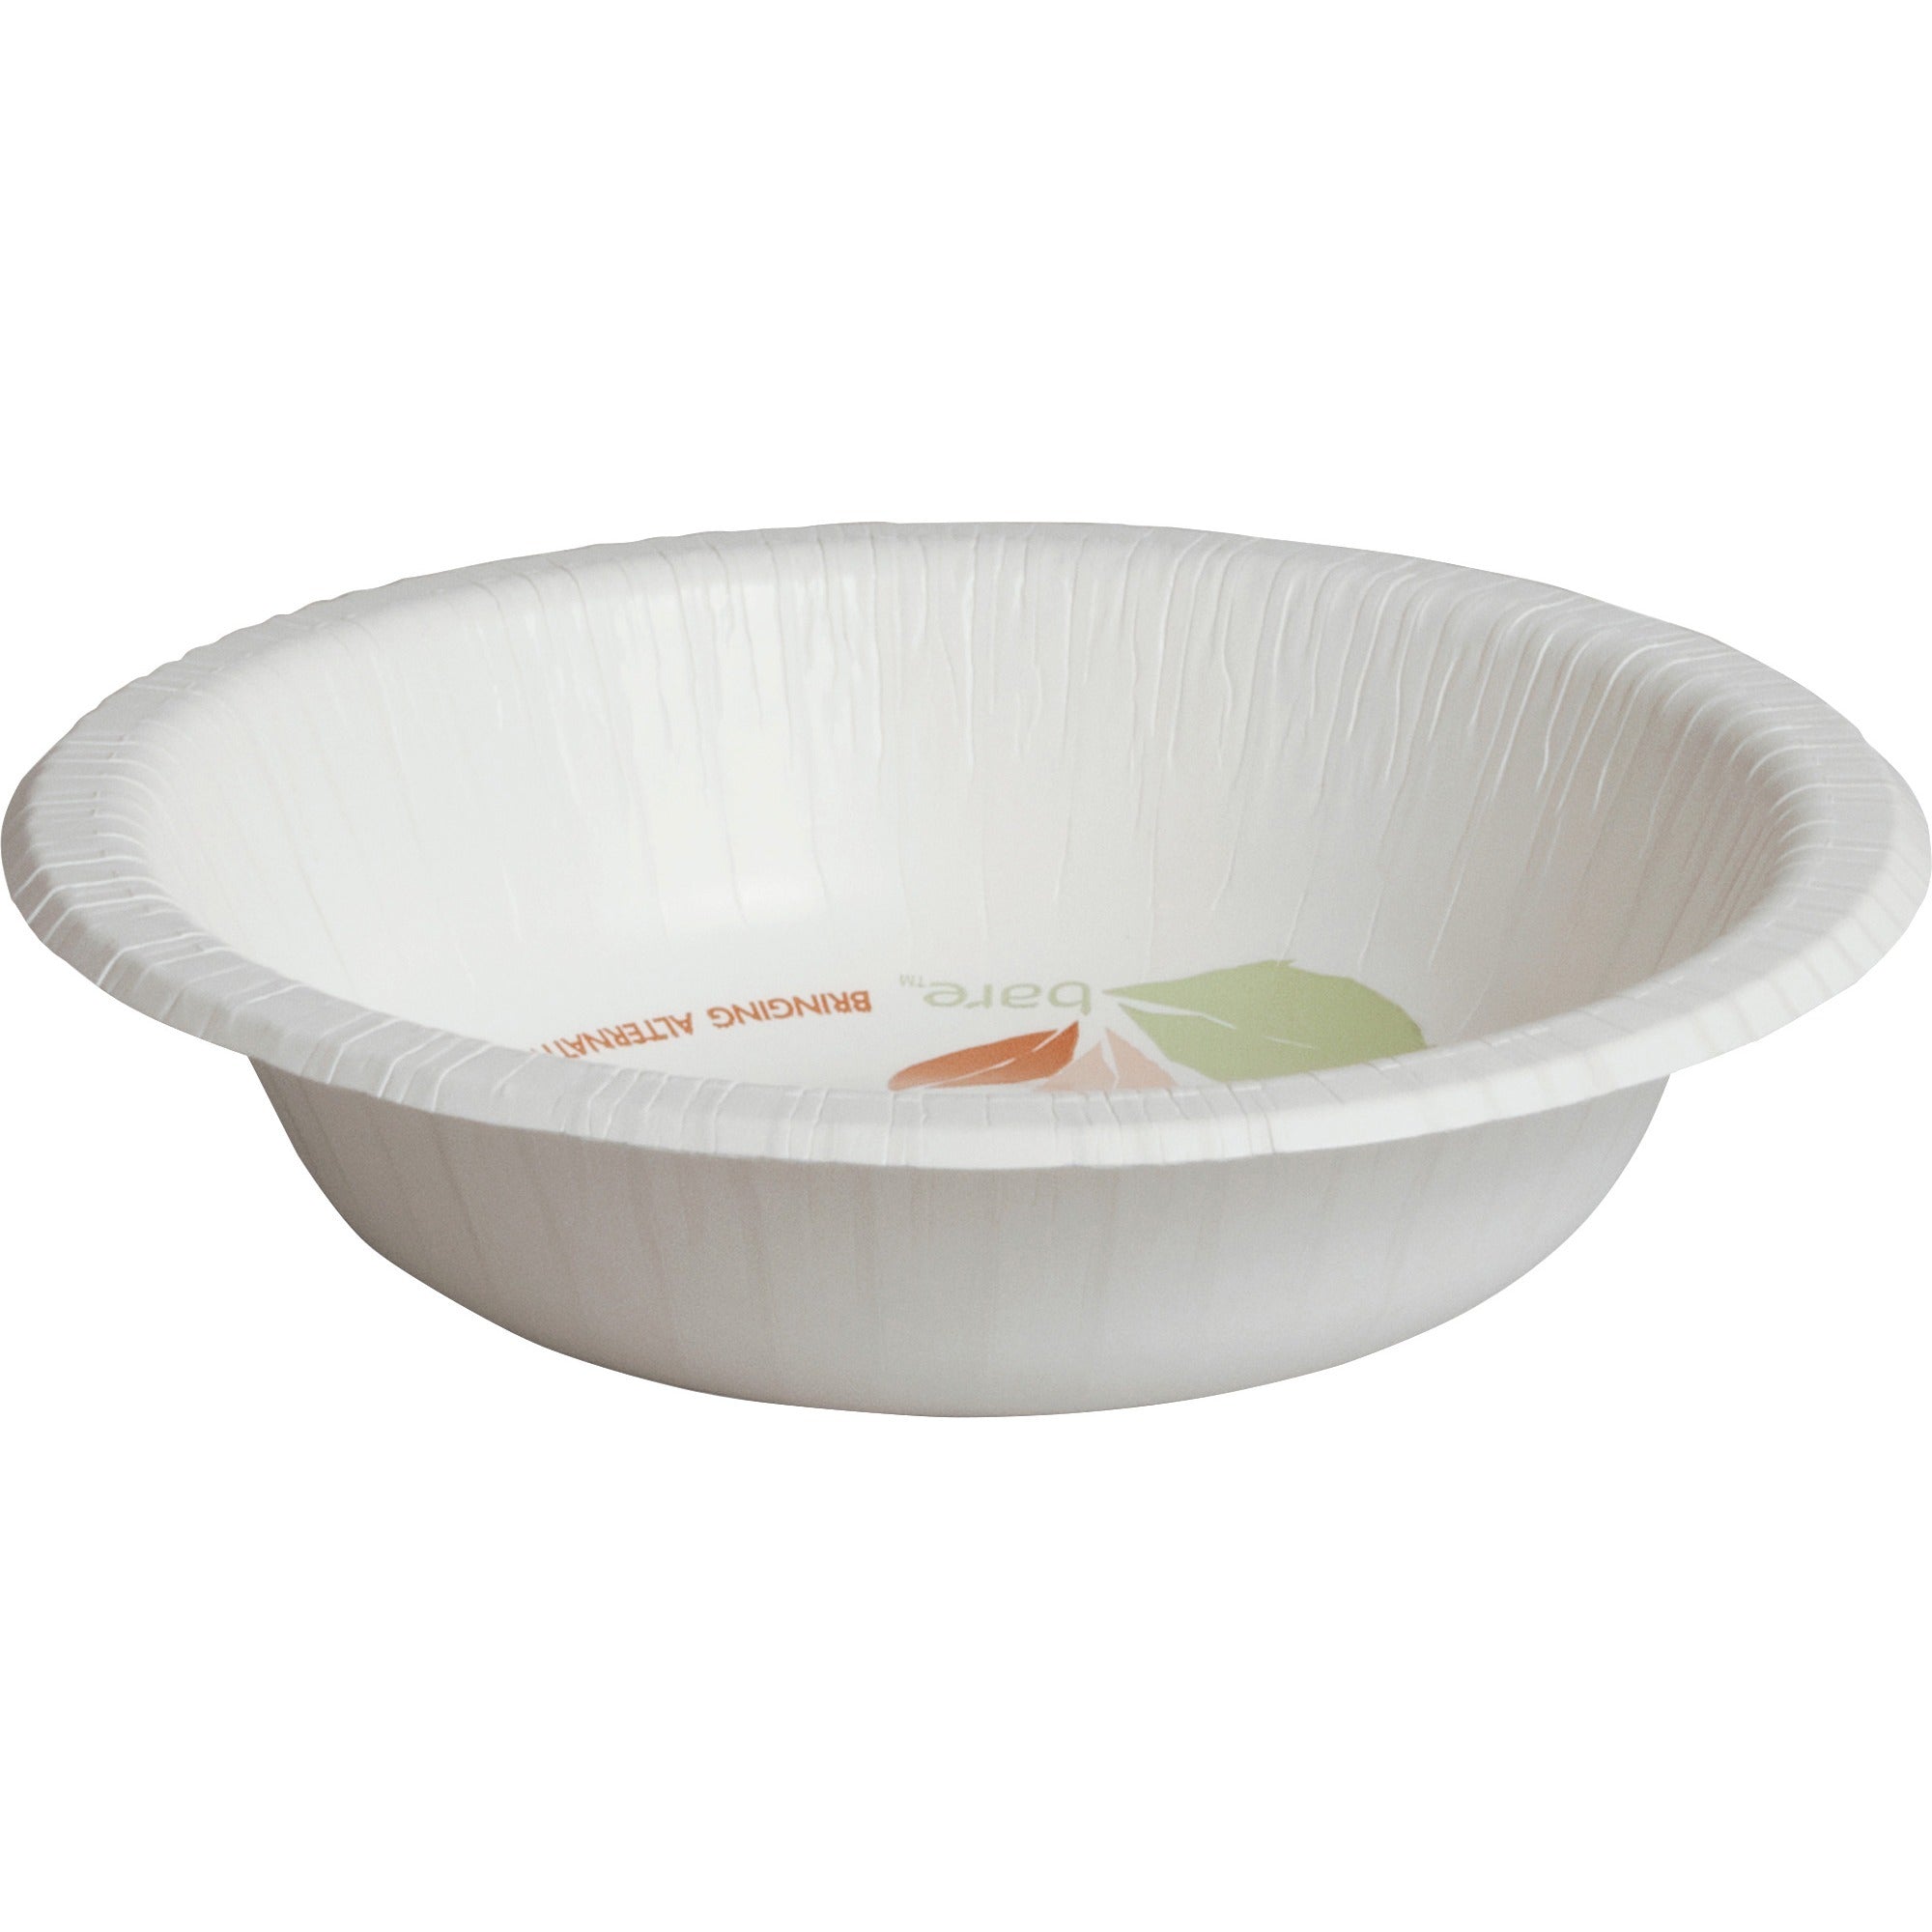 solo-bare-12-oz-heavyweight-paper-bowls-125-pack-bare-disposable-white-paper-body-8-carton_scchb12bj7234ct - 1